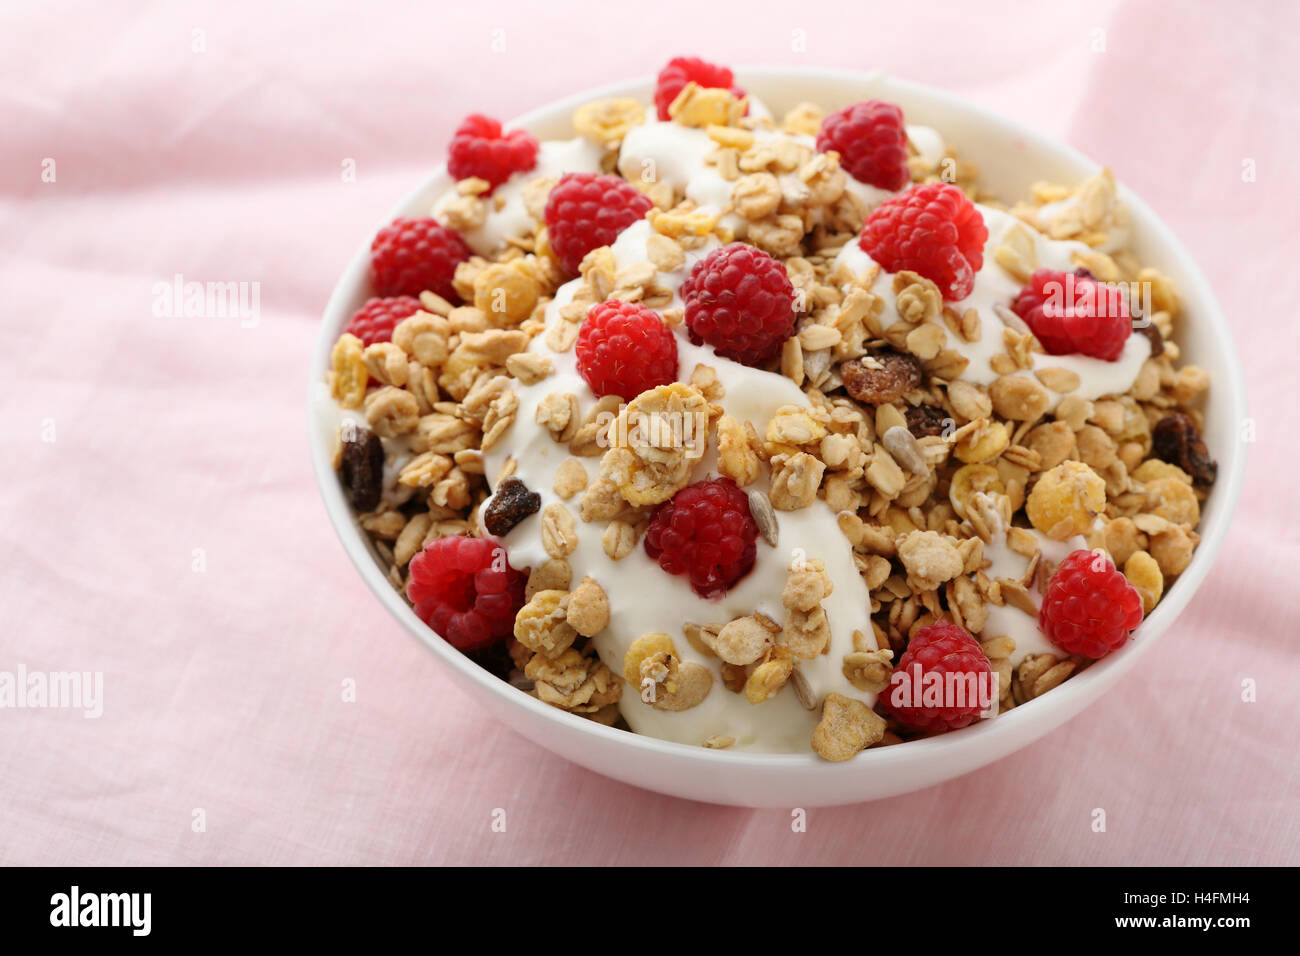 Healthy granola with berries, food close-up Stock Photo